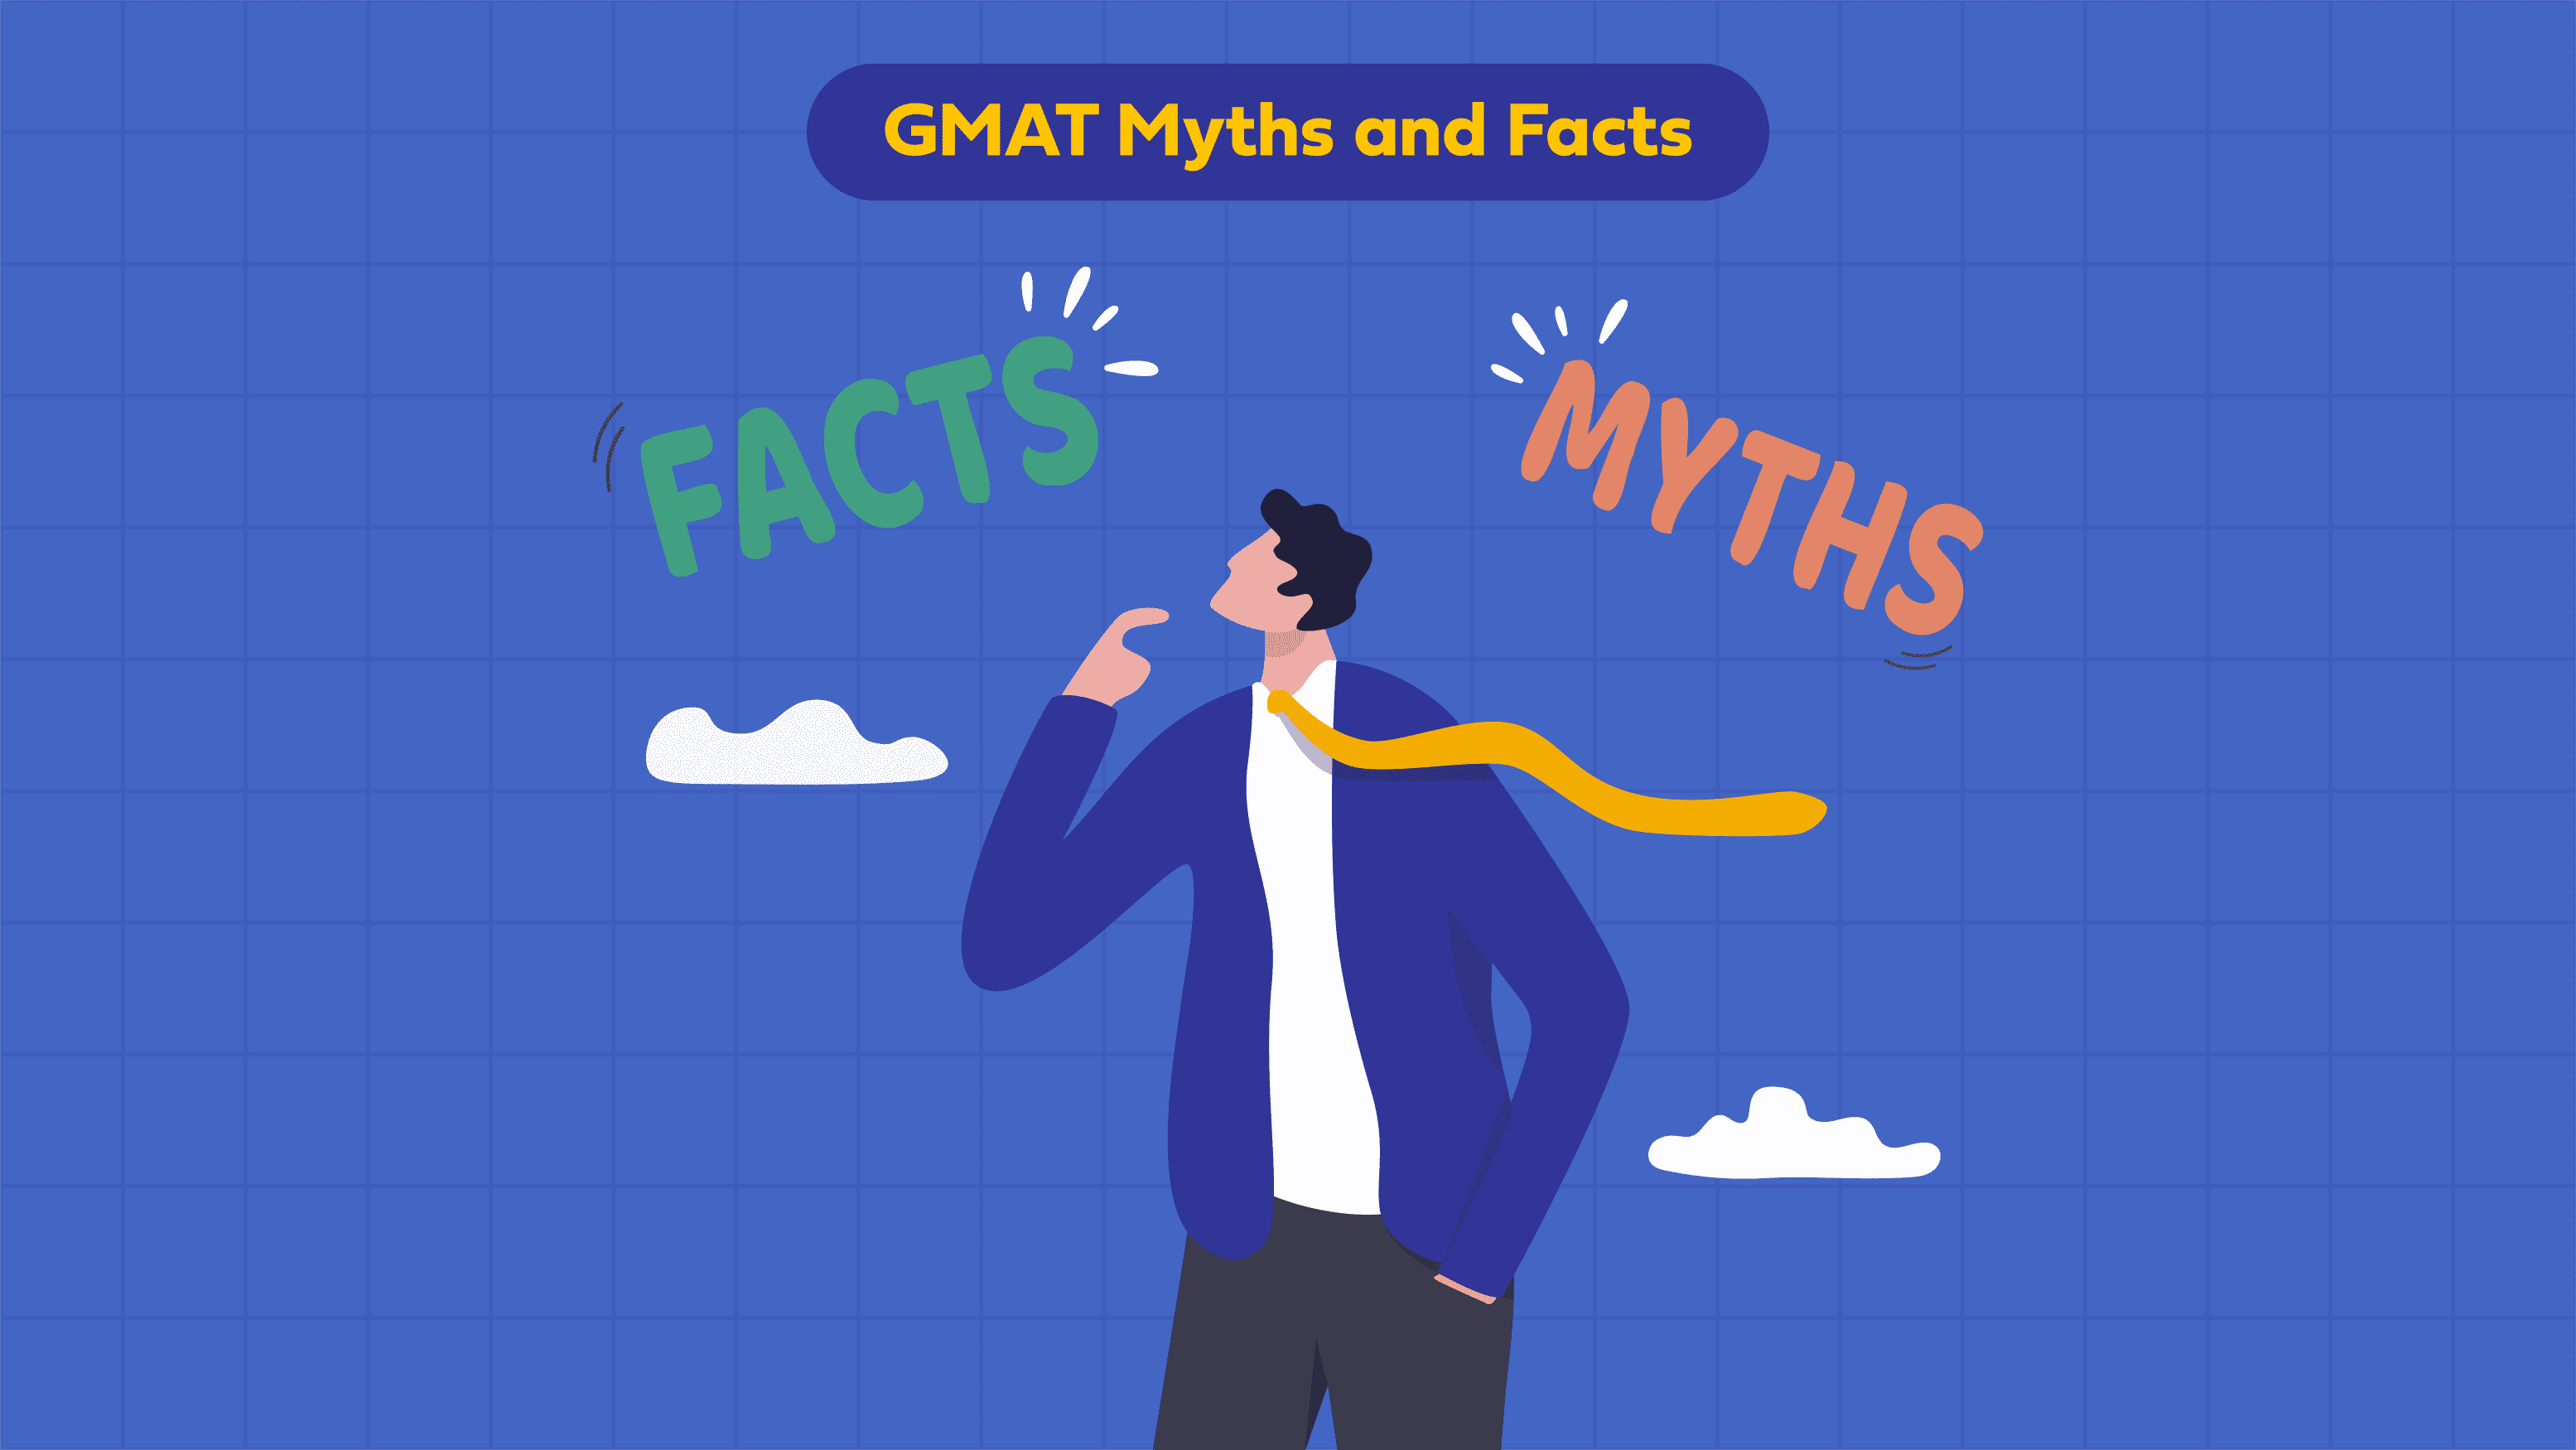 GMAT Myths and Facts